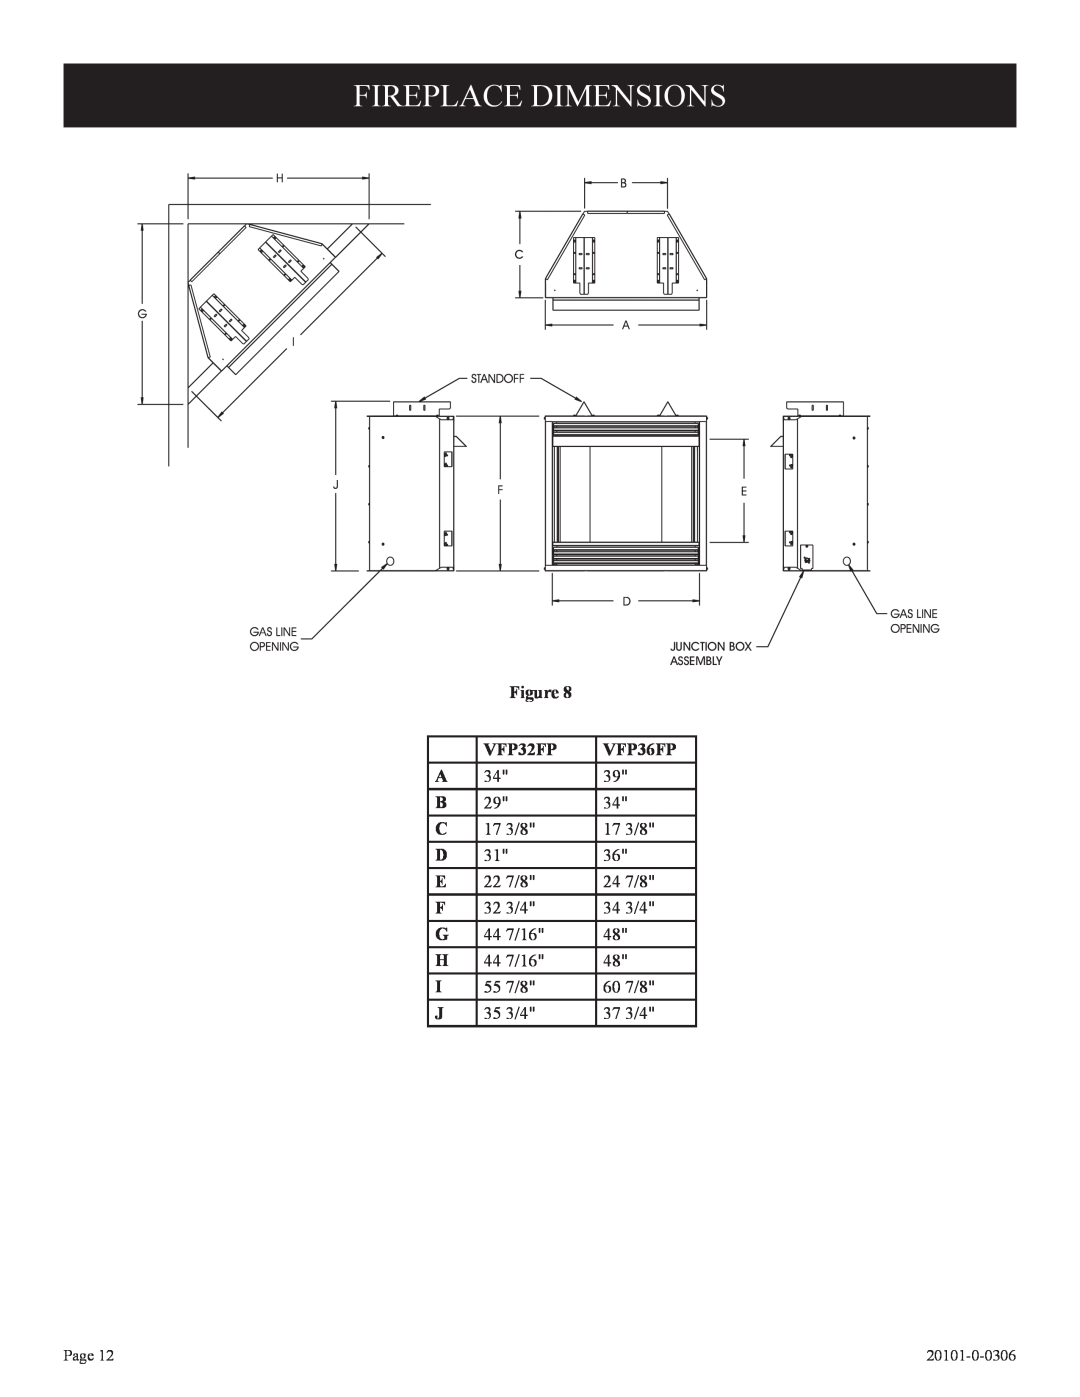 Empire Comfort Systems 31)L(N, P)-1, 21)L(N installation instructions Fireplace Dimensions, VFP32FP, VFP36FP 